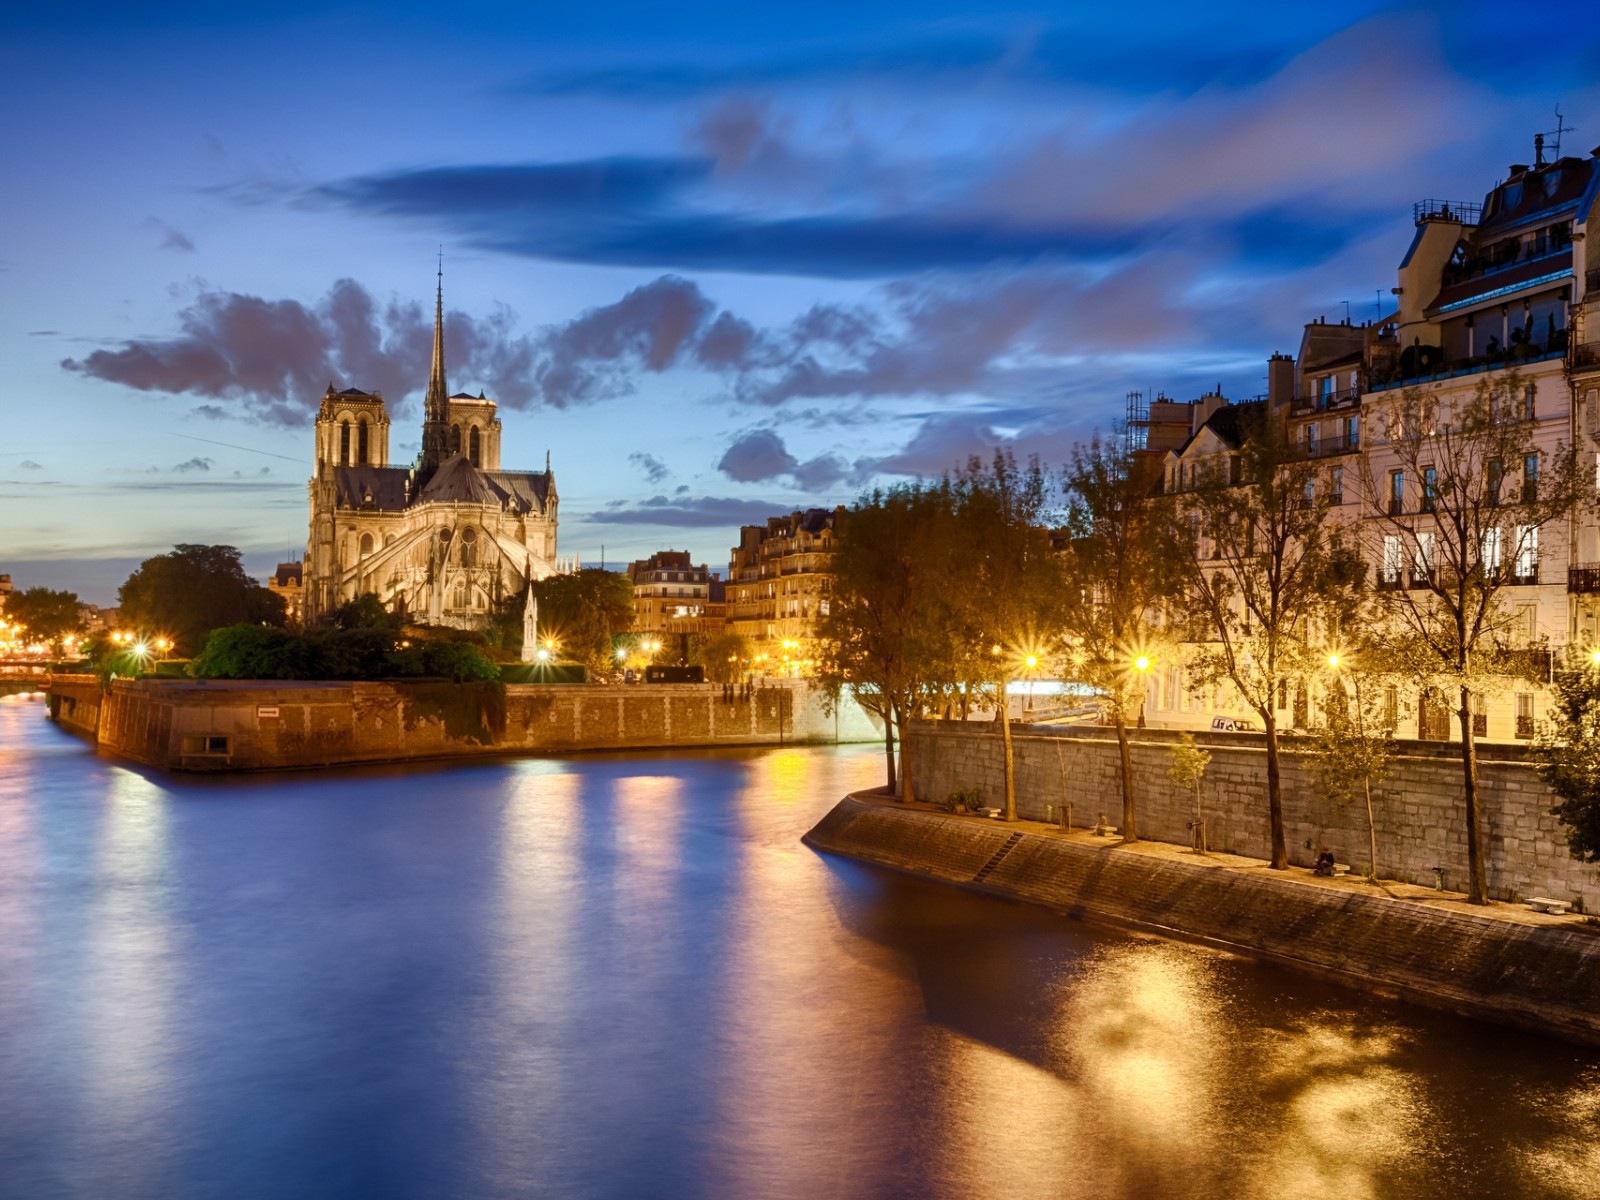 Notre Dame HD Wallpapers #1 - 1600x1200